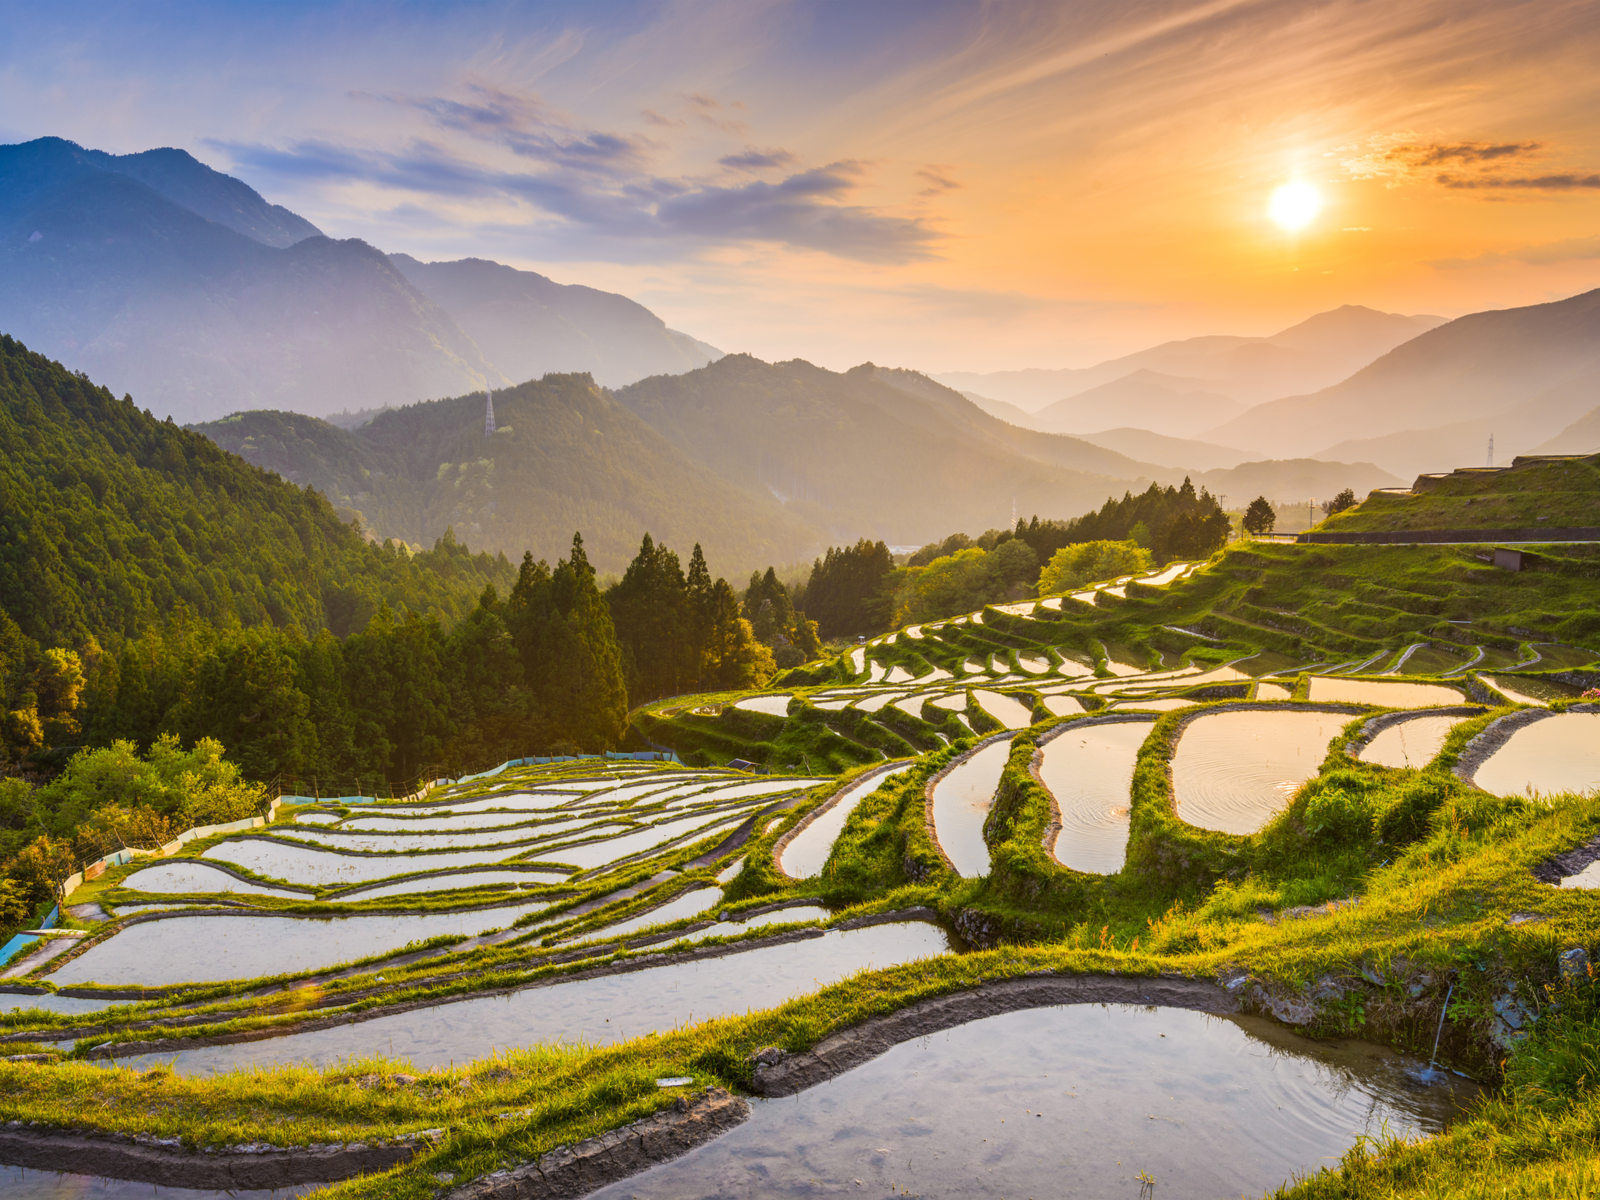 Rice paddy terrace pictured with a sunrise in the distance during the best time to visit Japan